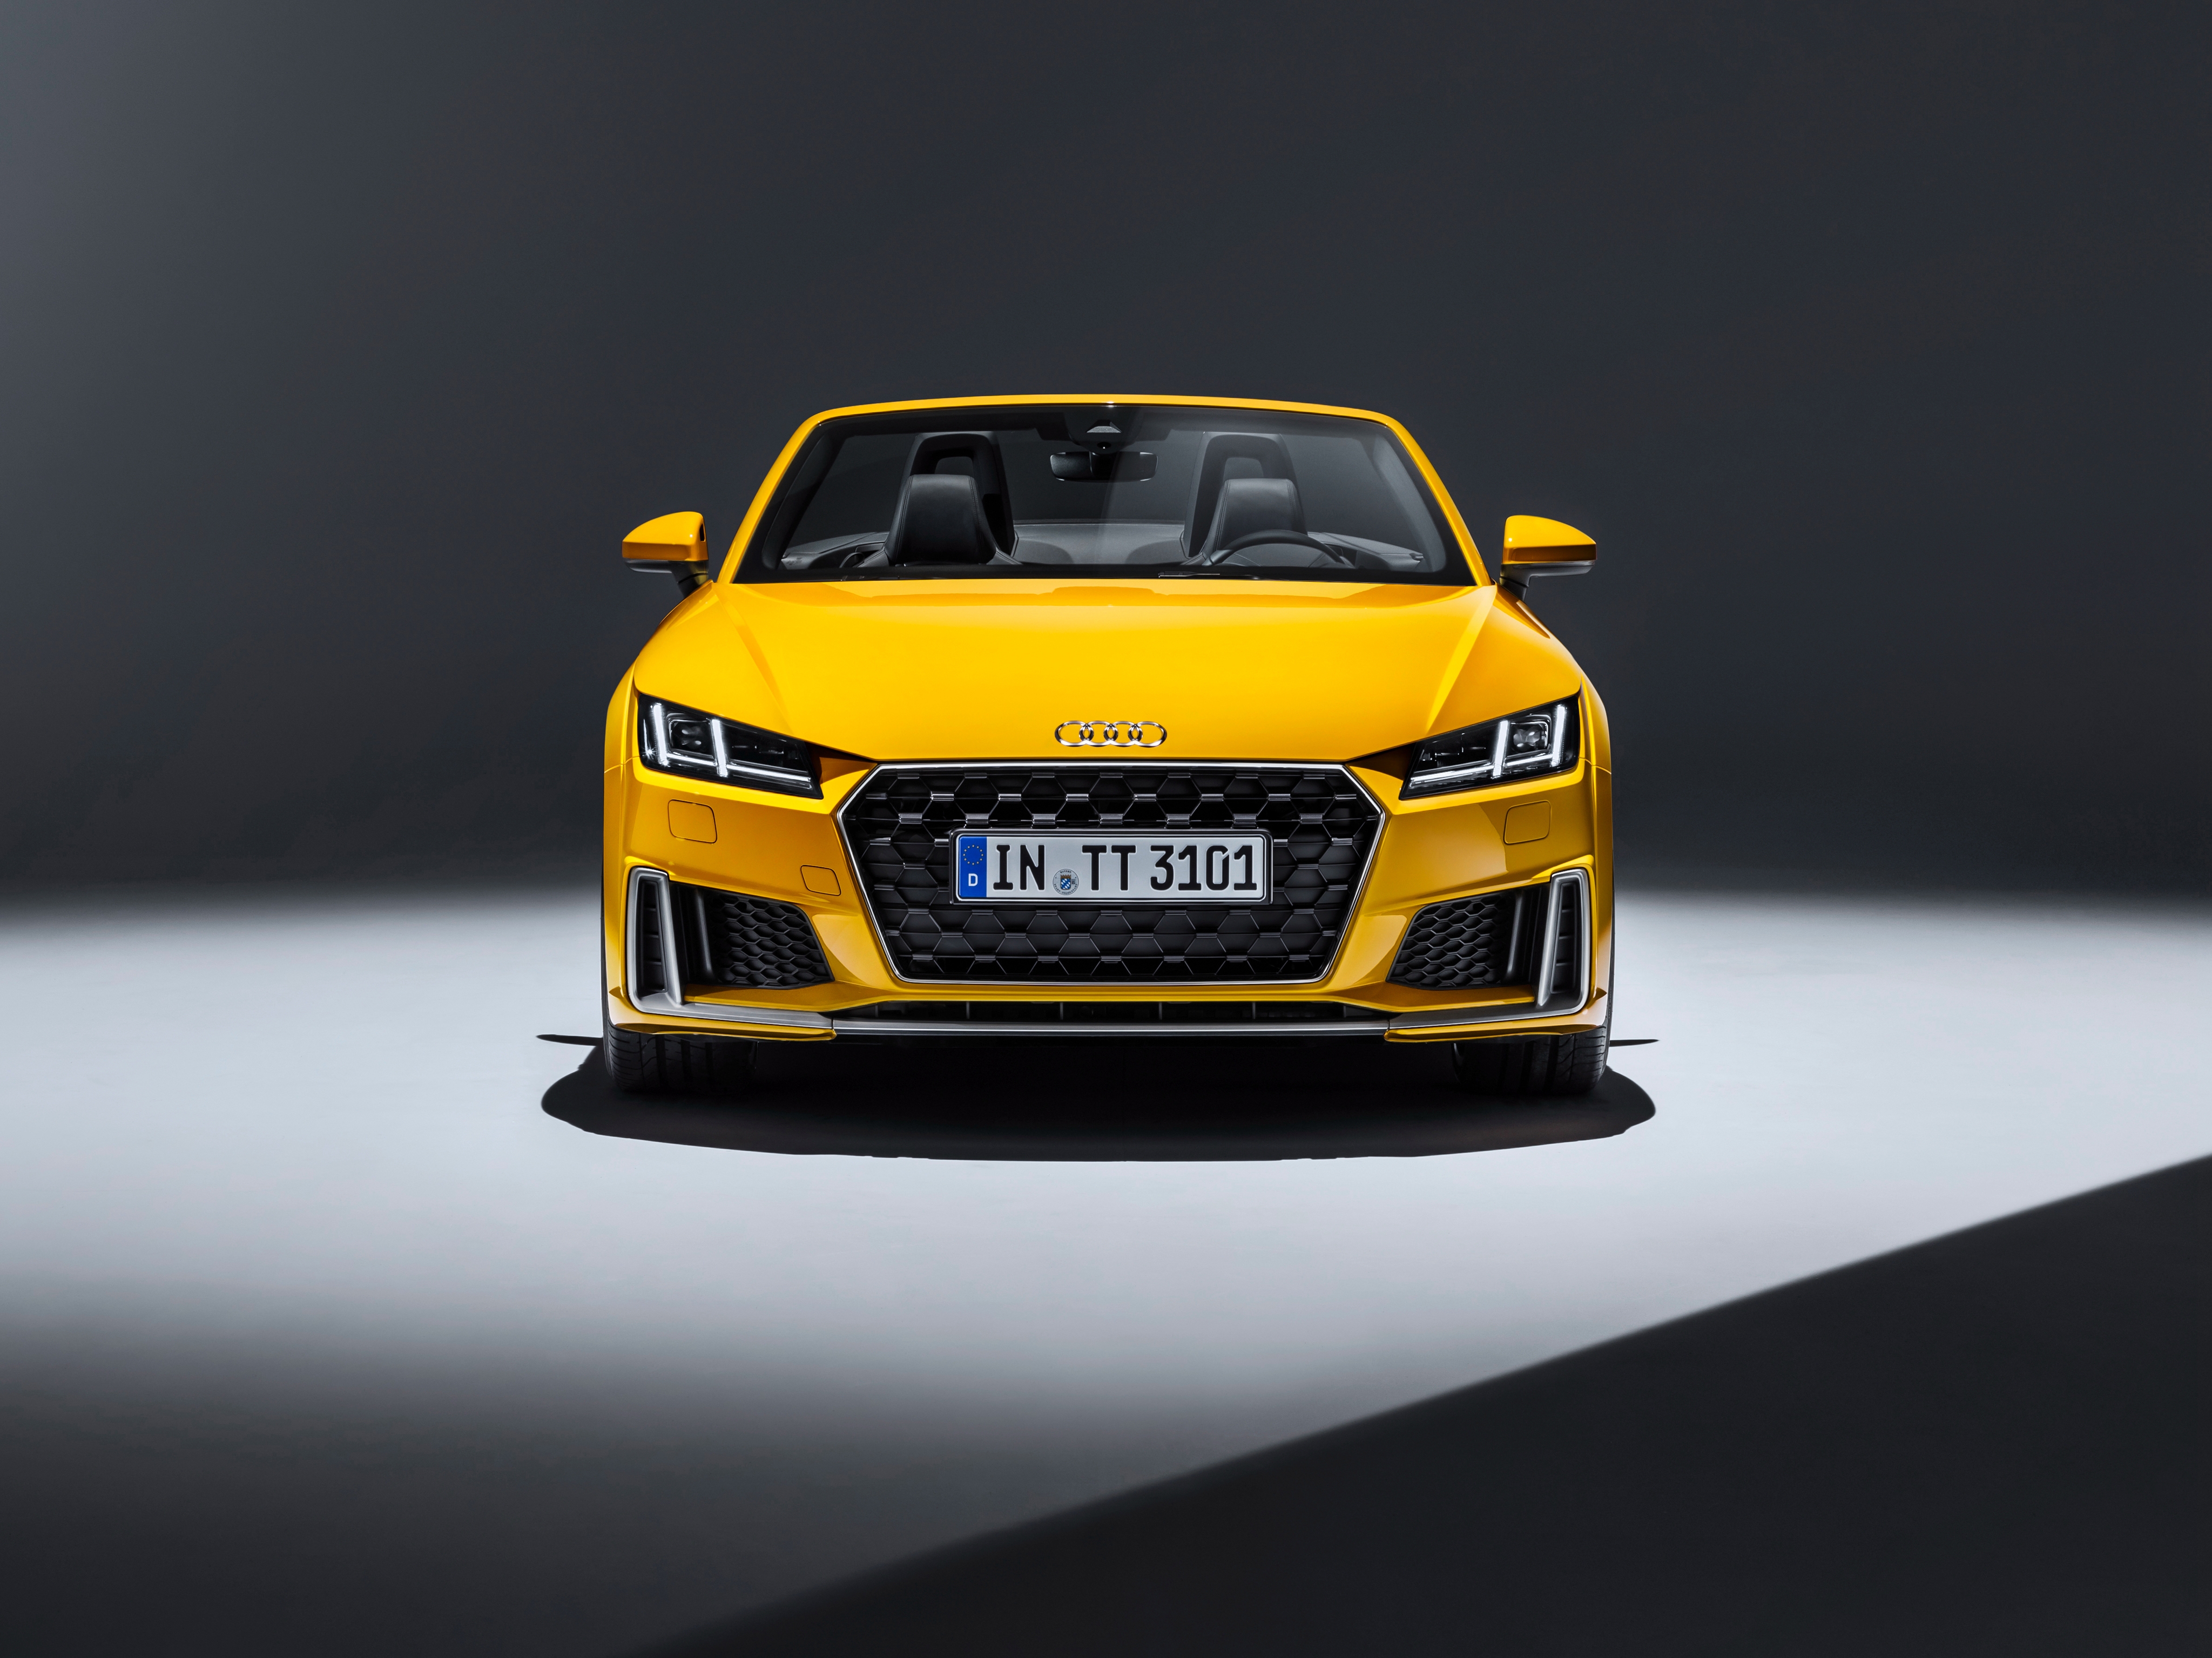 Wallpapers Audi yellow car view from front on the desktop